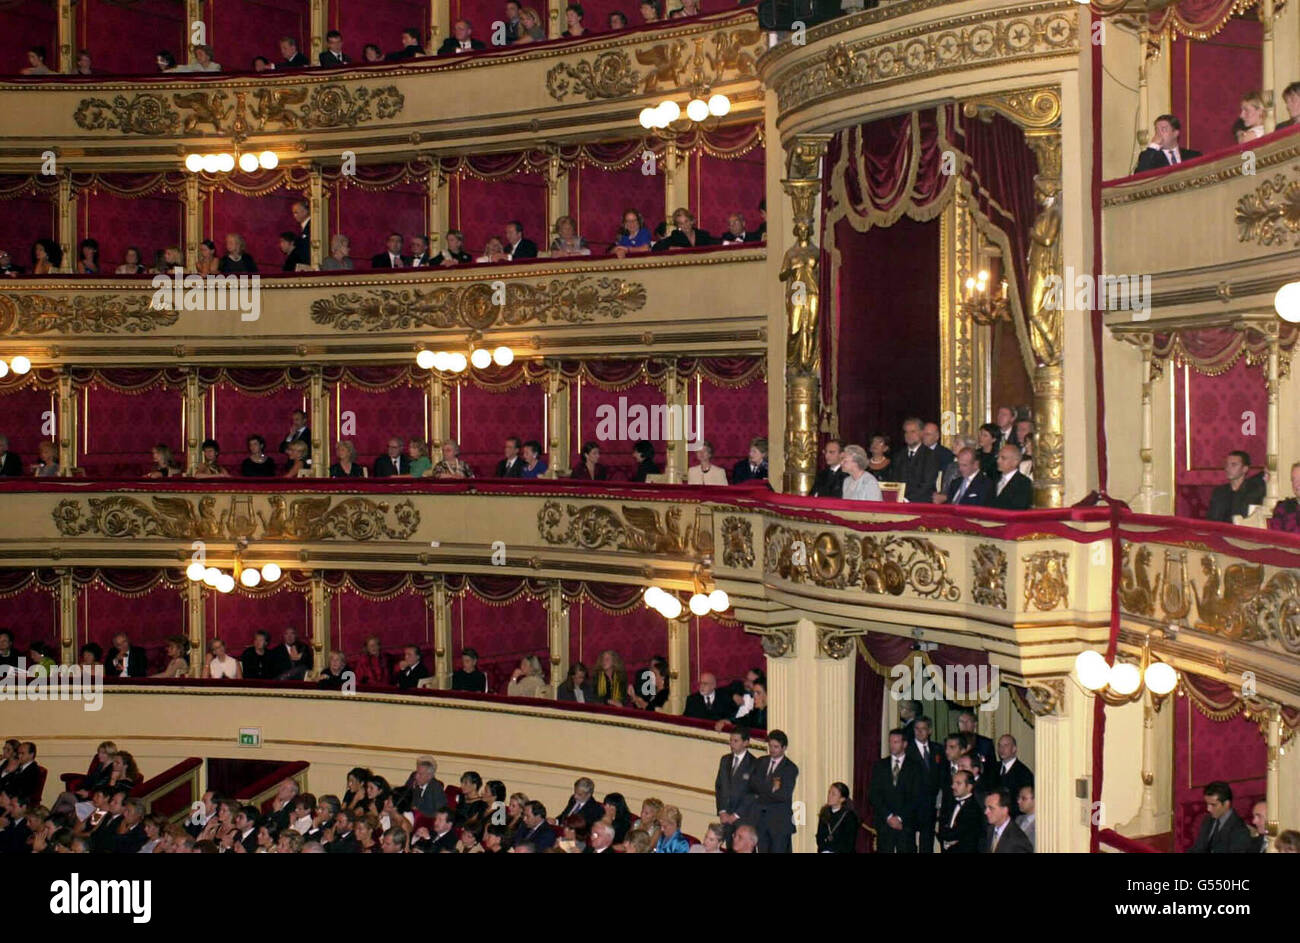 Queen Elizabeth II, in a pale blue dress, and Prince Philip, to her left, in the box at La Scala Opera House, Milan, to see a performance of In The South by Edward Elgar. Riccardo Muti will conduct with the La Scala Philharmonic Orchestra. *... on the penultimate day of the state visit to Italy. Stock Photo